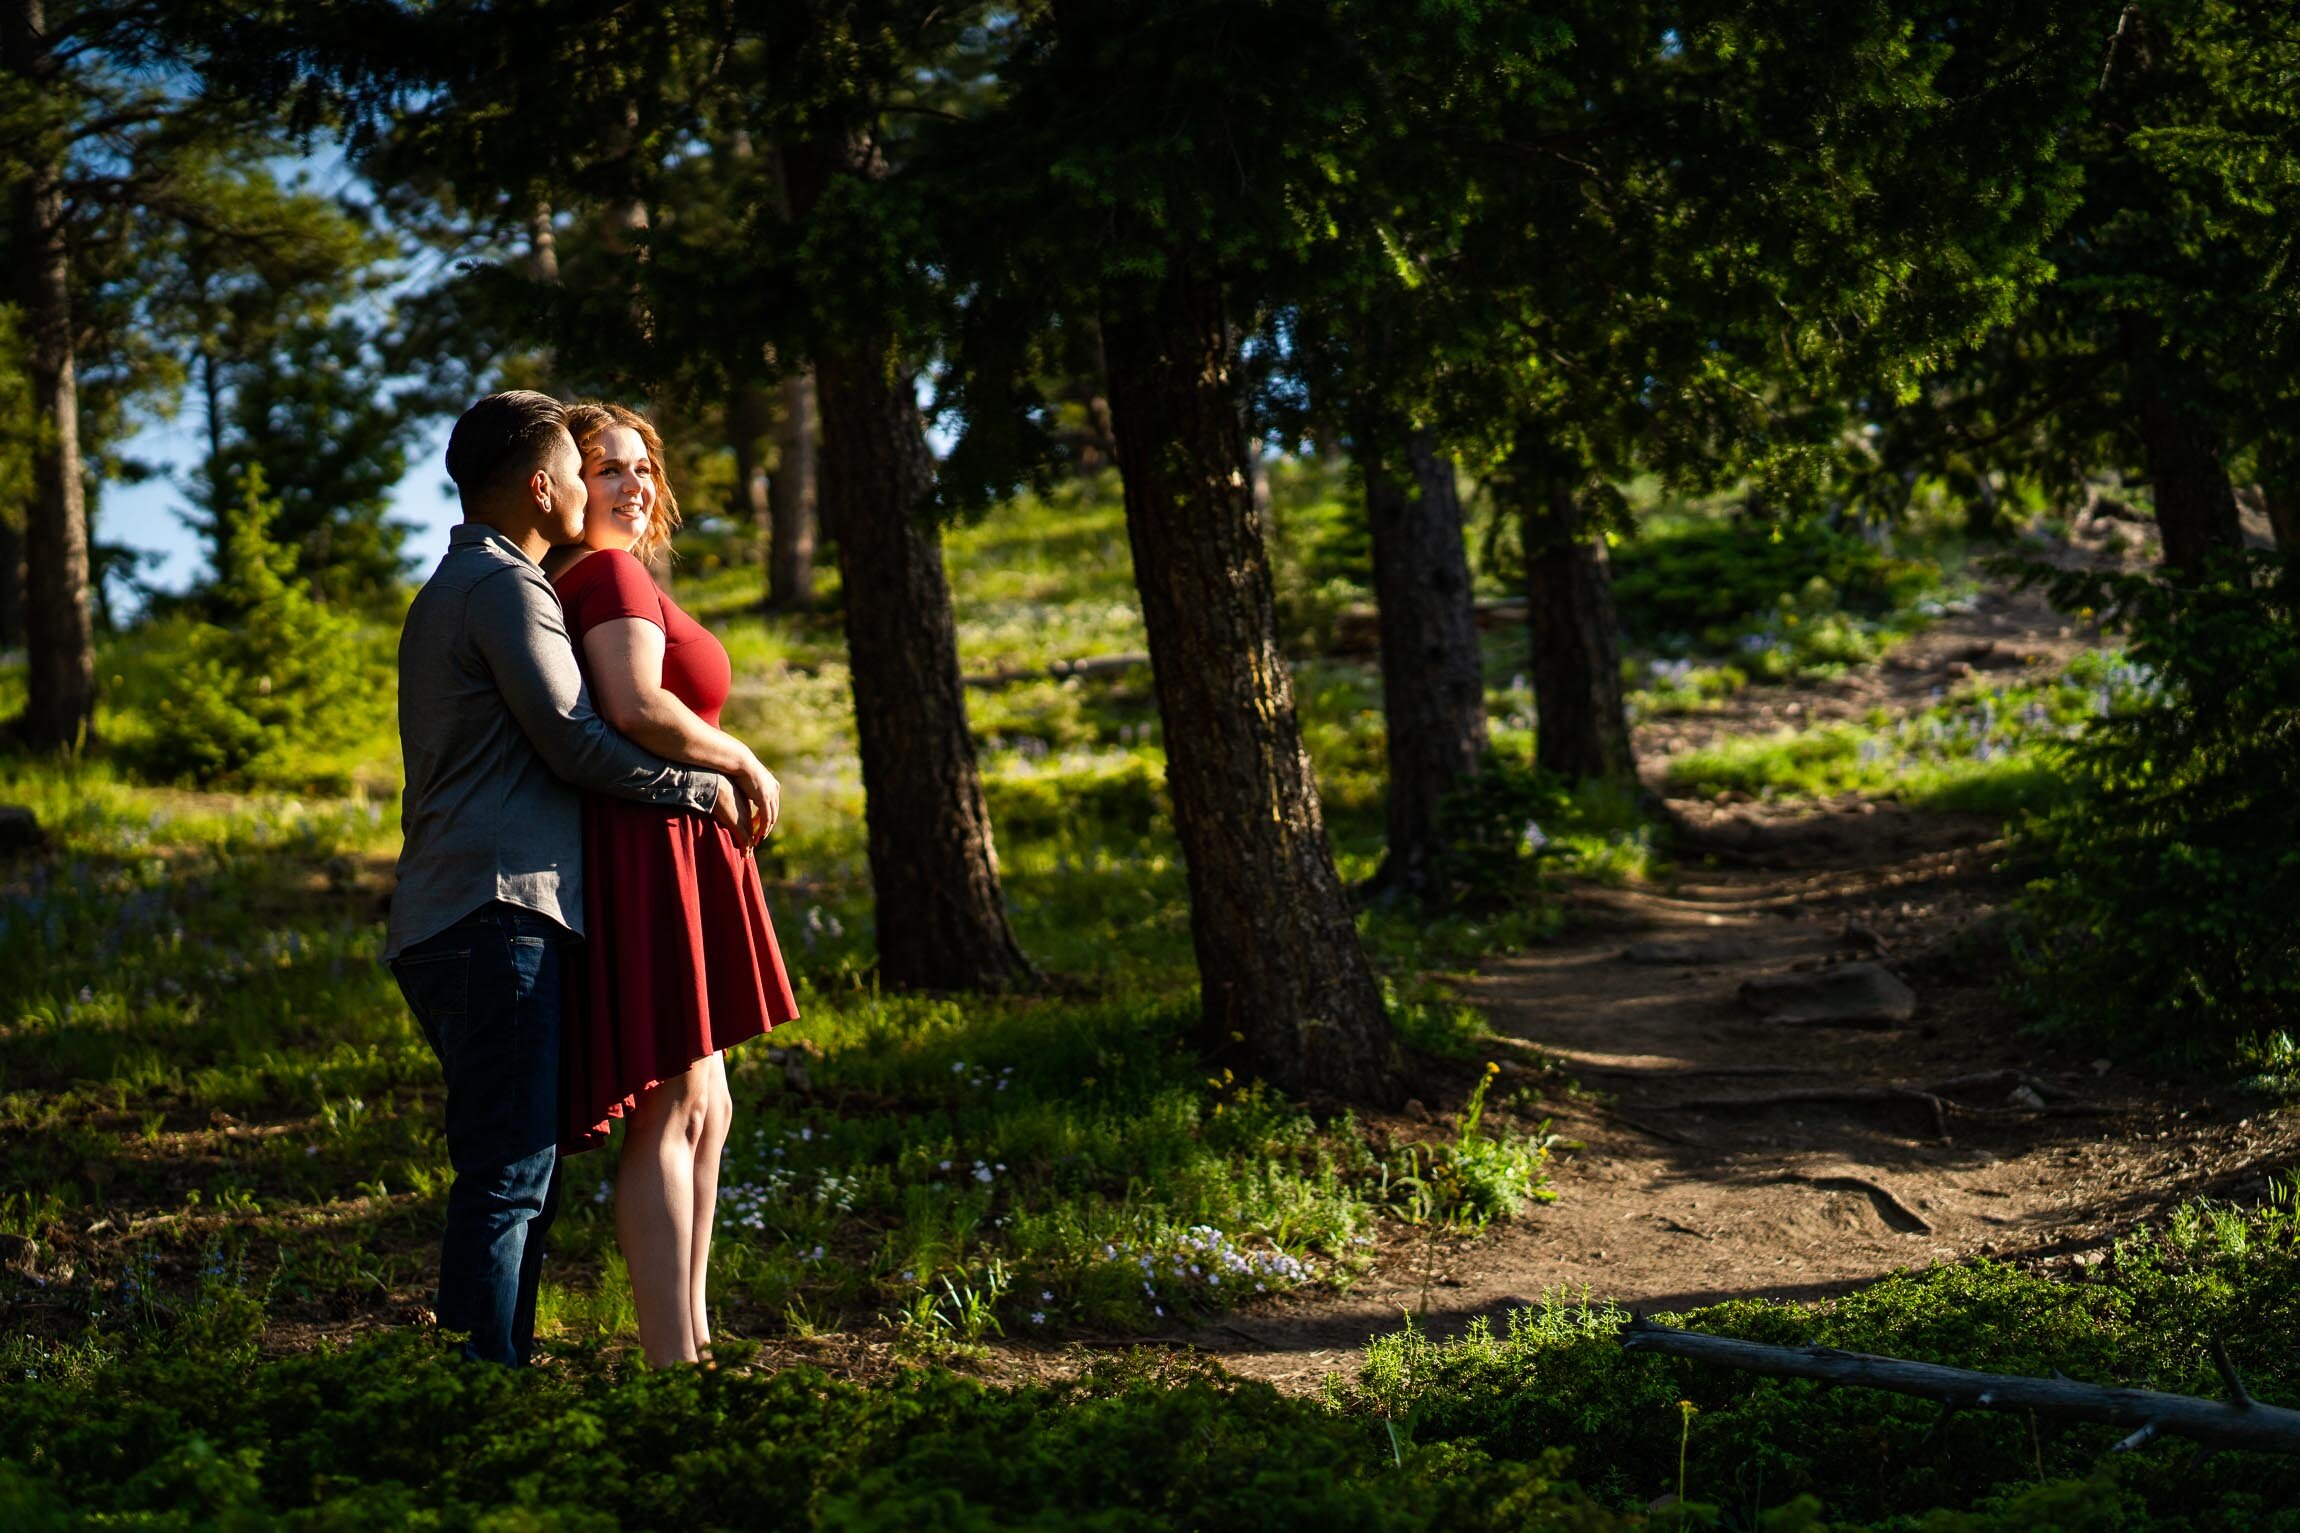 Engaged couple posing for a portrait in golden light surrounded by wildflowers in a forest, Engagement Session, Engagement Photos, Engagement Photos Inspiration, Engagement Photography, Engagement Photographer, Summer Engagement Photos, Mountain Engagement Photos, Lost Gulch Overlook engagement session, Lost Gulch Overlook engagement photos, Lost Gulch Overlook engagement photography, Lost Gulch Overlook engagement photographer, Lost Gulch Overlook  engagement inspiration, Boulder engagement session, Boulder engagement photos, Boulder engagement photography, Boulder engagement photographer, Boulder engagement inspiration, Colorado engagement session, Colorado engagement photos, Colorado engagement photography, Colorado engagement photographer, Colorado engagement inspiration